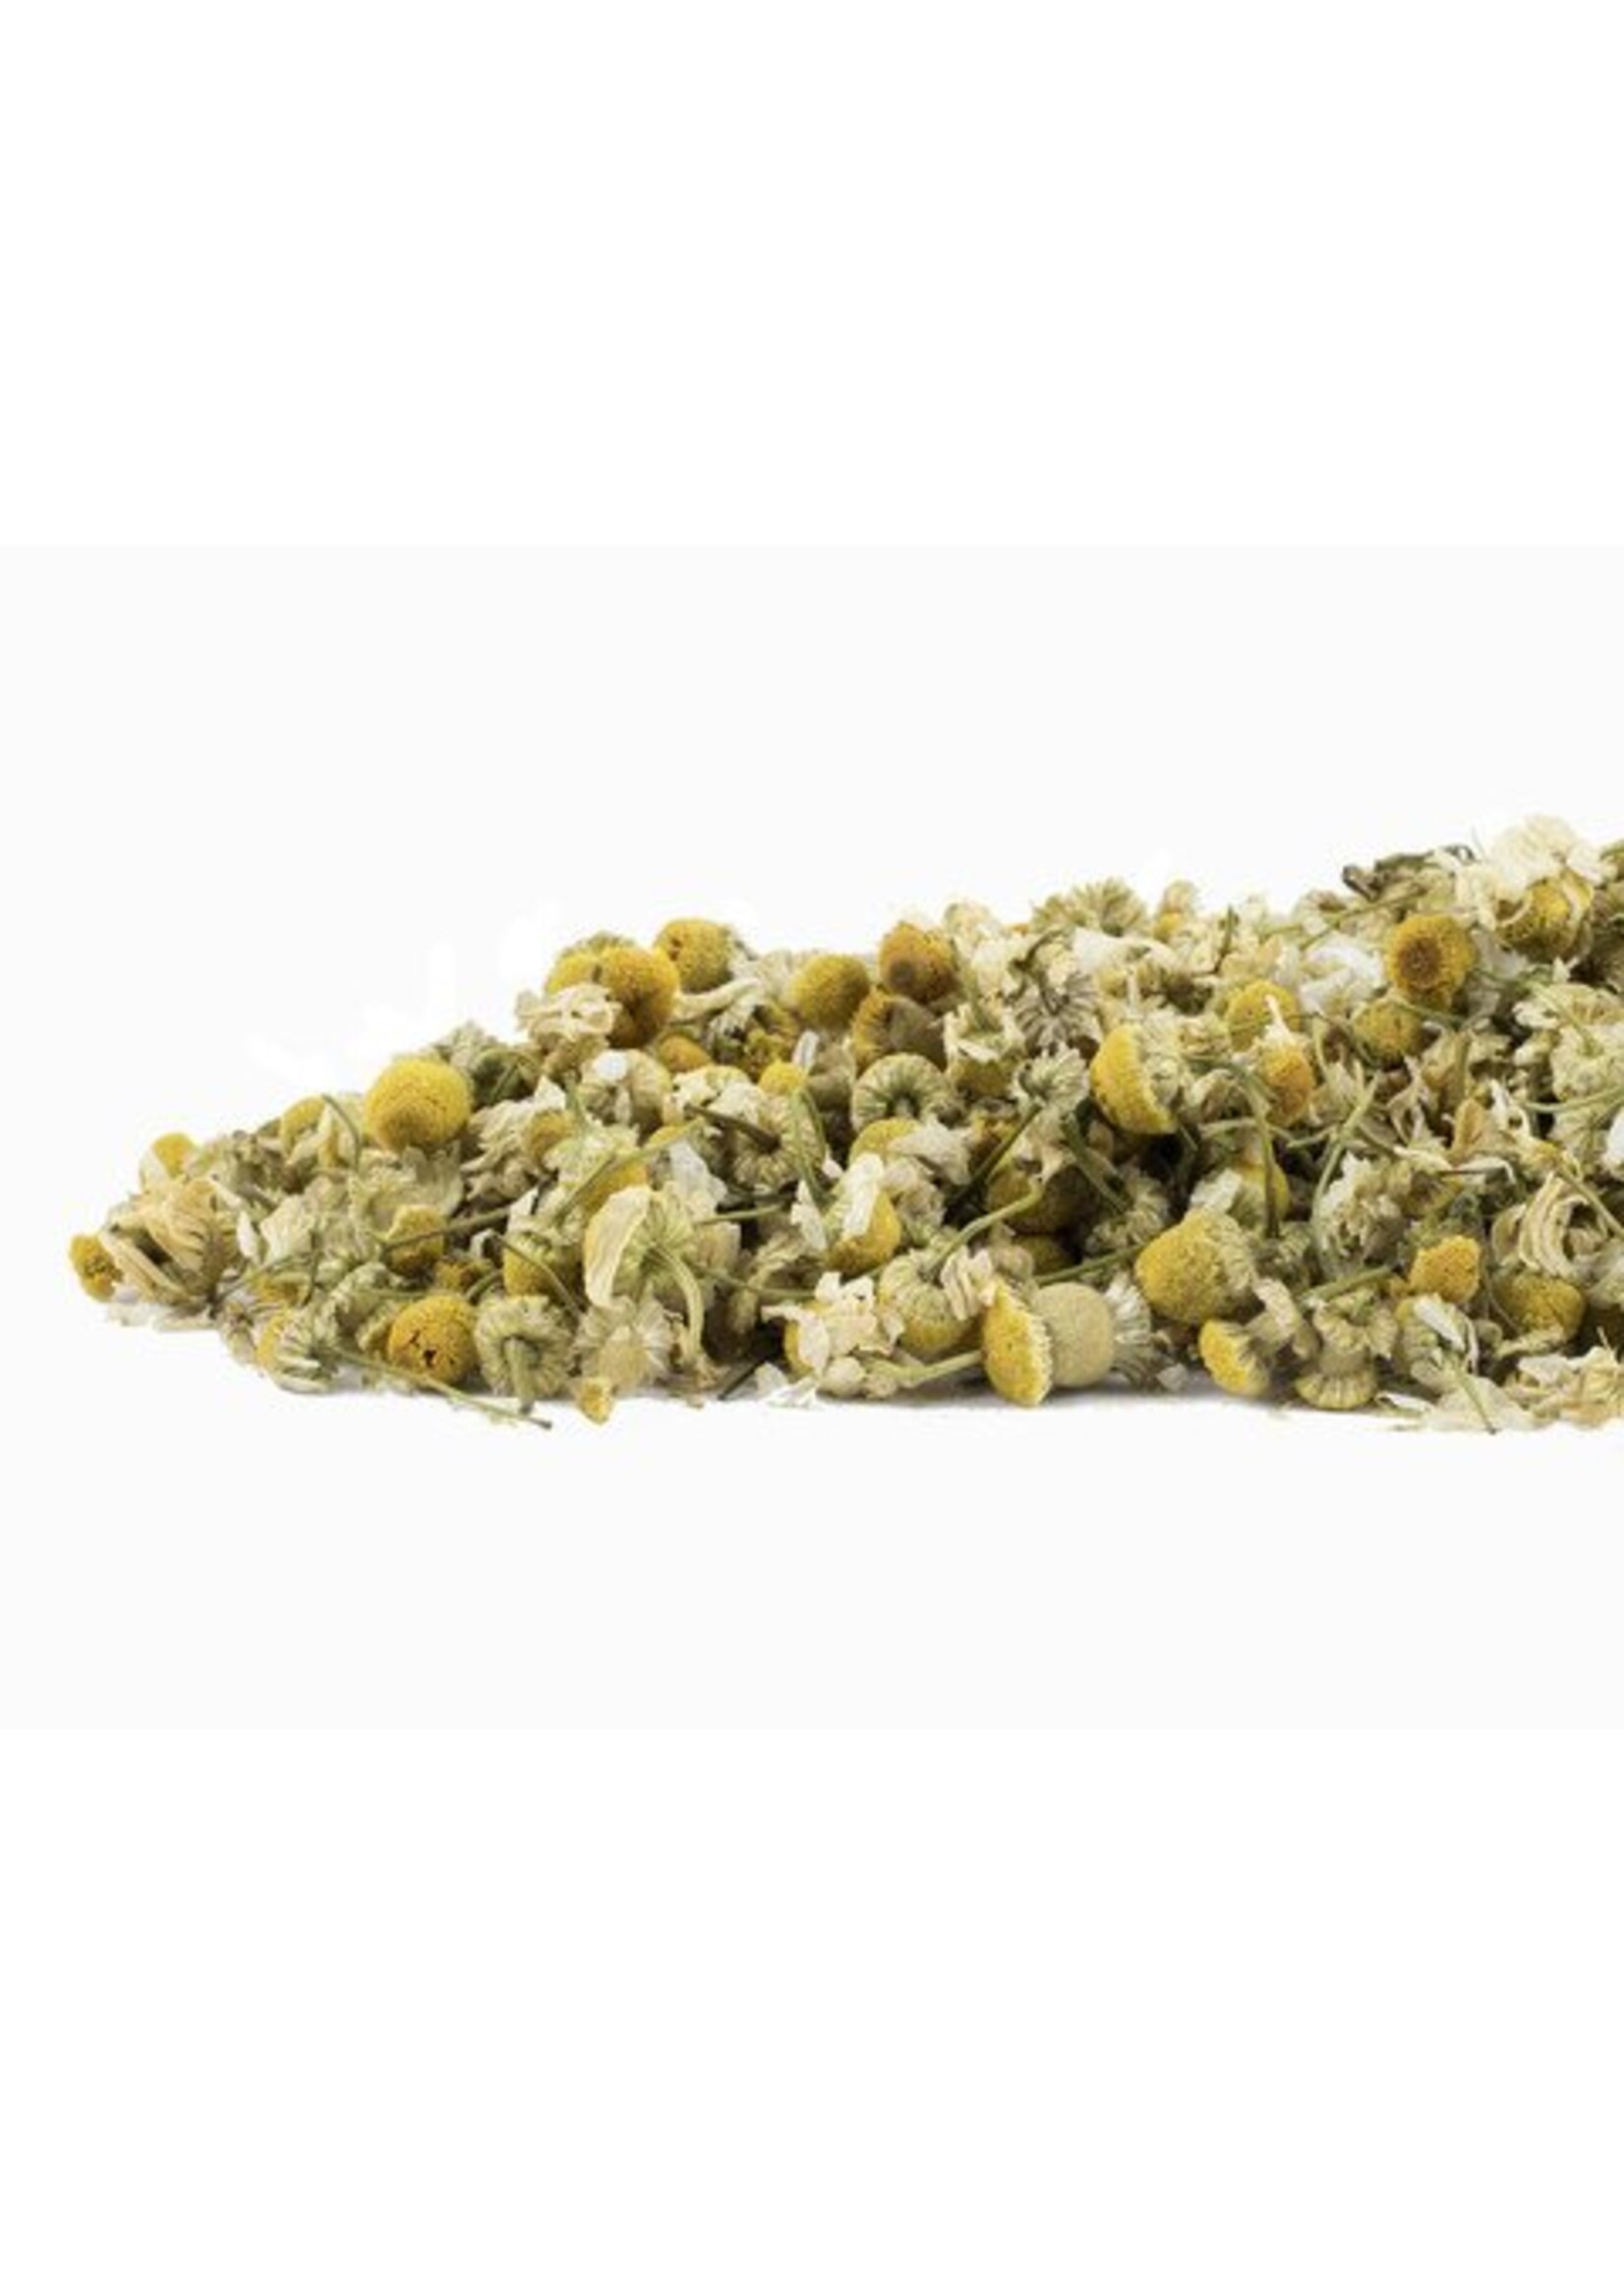 Organic Chamomile Flower - Sold Per Ounce